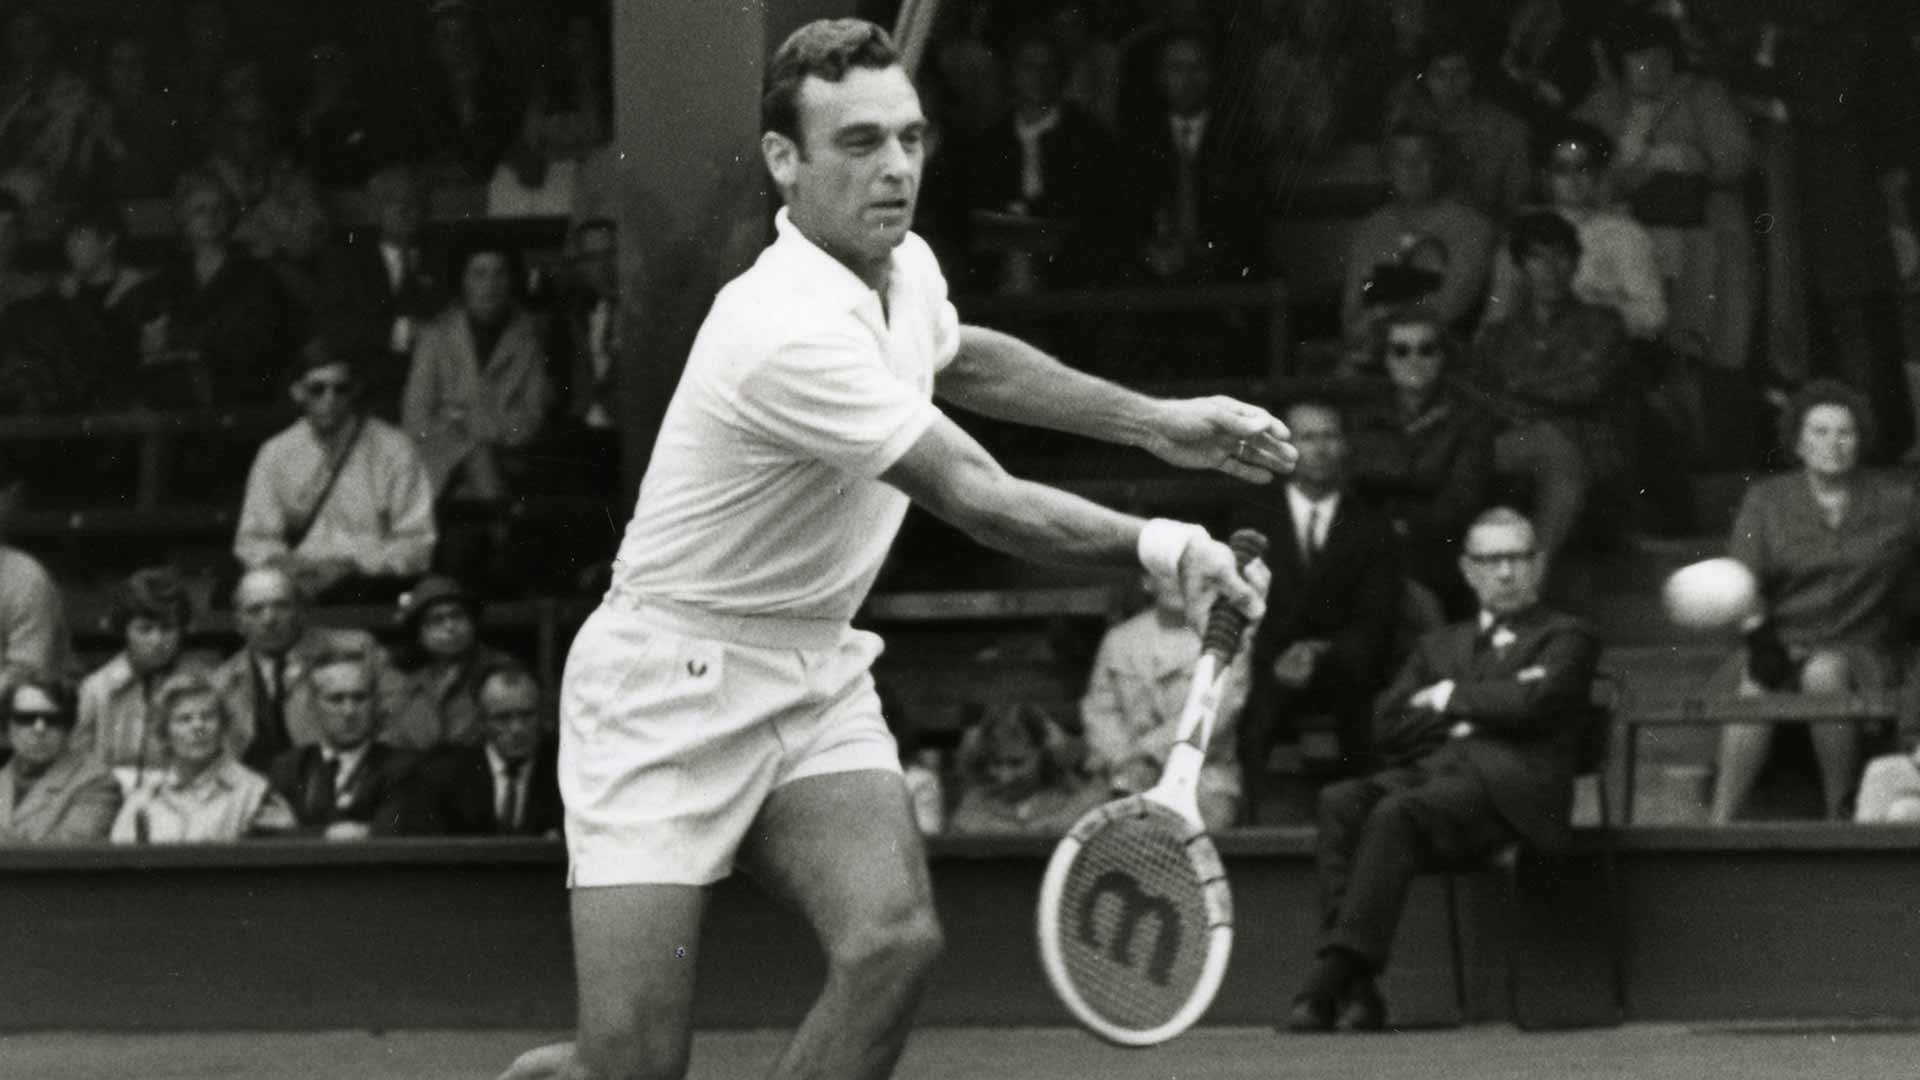 Vic Seixas in action at Wimbledon in 1969.